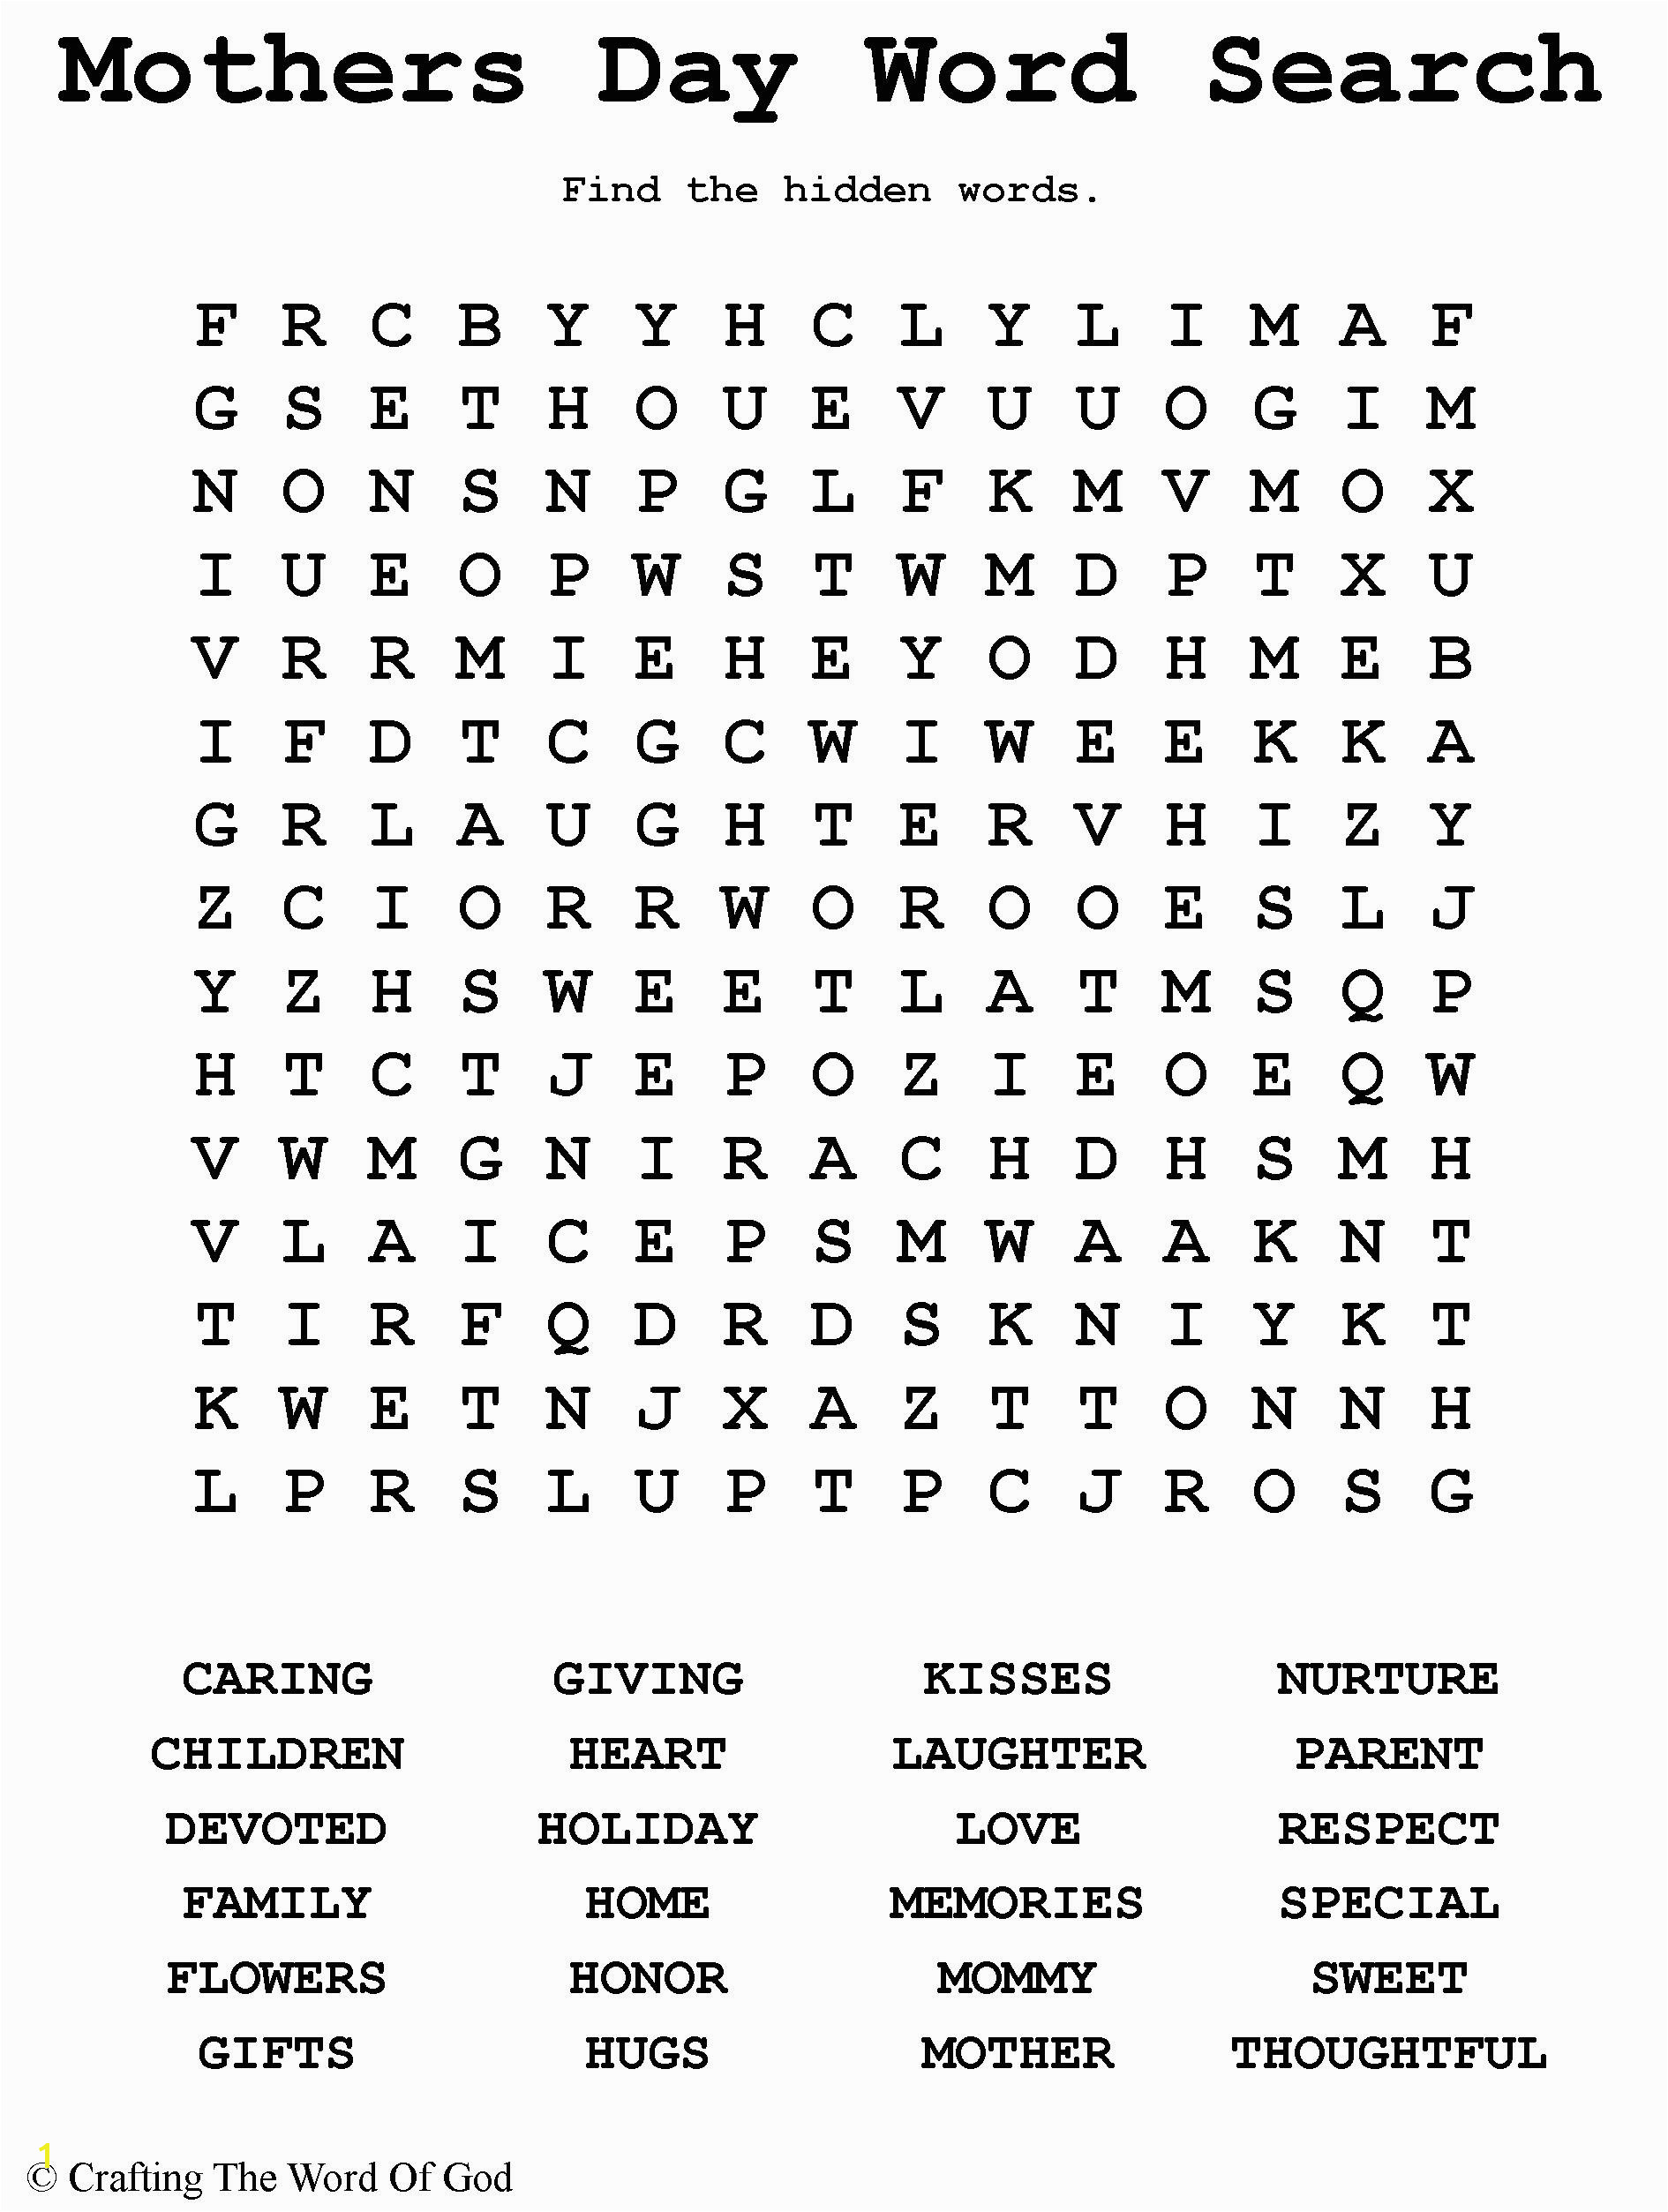 Mothers Day Word Search Activity Sheet